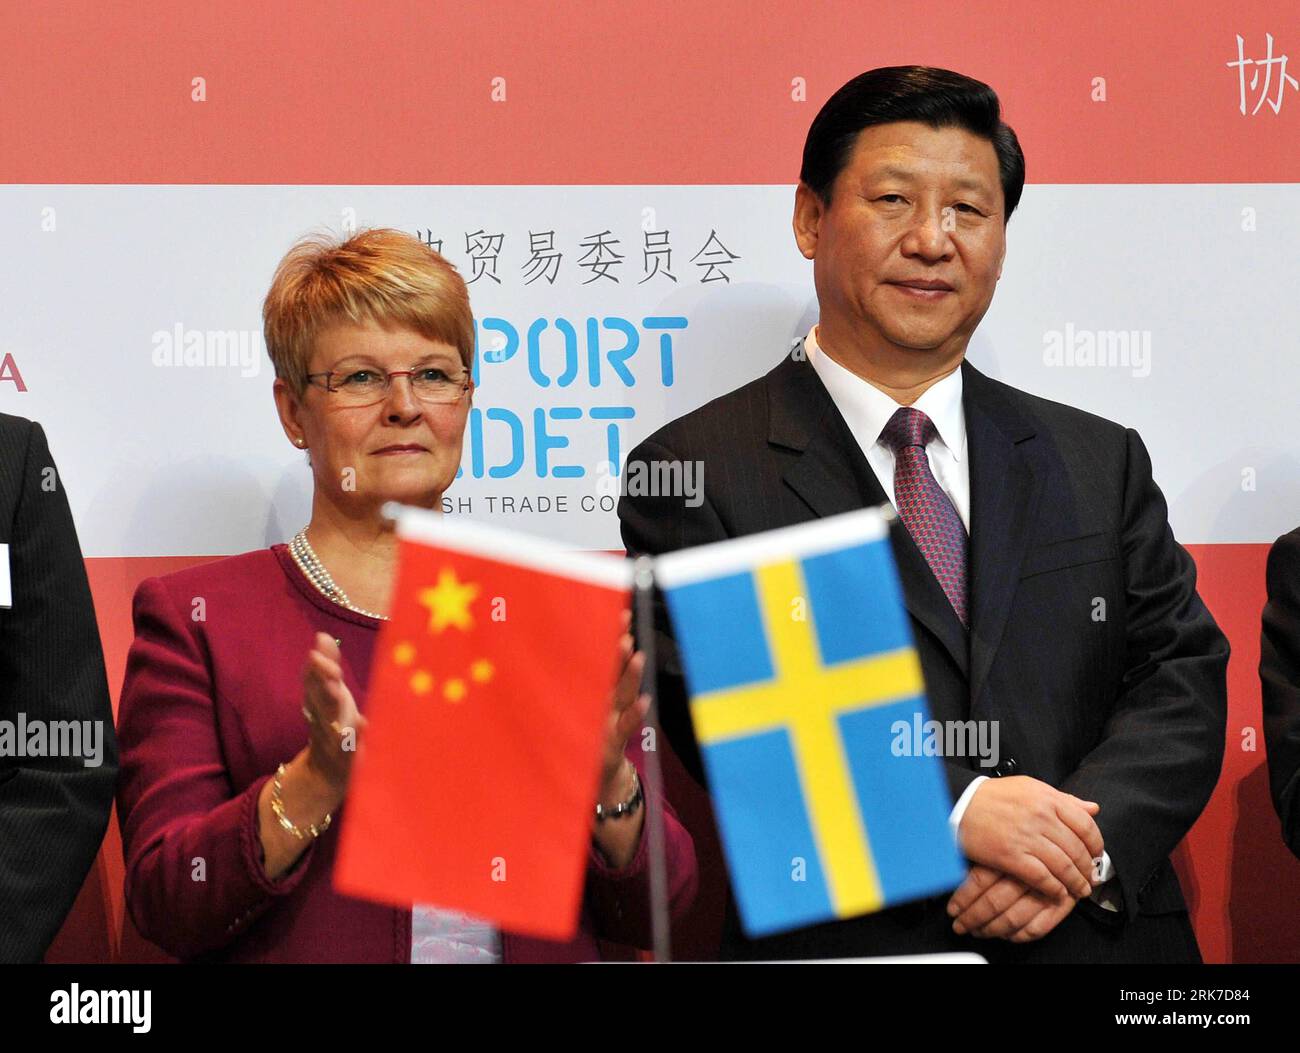 Bildnummer: 53901350  Datum: 29.03.2010  Copyright: imago/Xinhua (100329) -- STOCKHOLM, March 29, 2010 (Xinhua) -- Chinese Vice President Xi Jinping (R) and Swedish Deputy Prime Minister Maud Olofsson attend the signing ceremony of agreements between Chinese and Swedish enterprises, in Stockholm March 29, 2010. (Xinhua/Wu Wei) (zcc) SWEDEN-CHINA-XI JINPING-SIGNING CEREMONY PUBLICATIONxNOTxINxCHN People Politik premiumd xint kbdig xsk 2010 quer     Bildnummer 53901350 Date 29 03 2010 Copyright Imago XINHUA  Stockholm March 29 2010 XINHUA Chinese Vice President Xi Jinping r and Swedish Deputy Pr Stock Photo